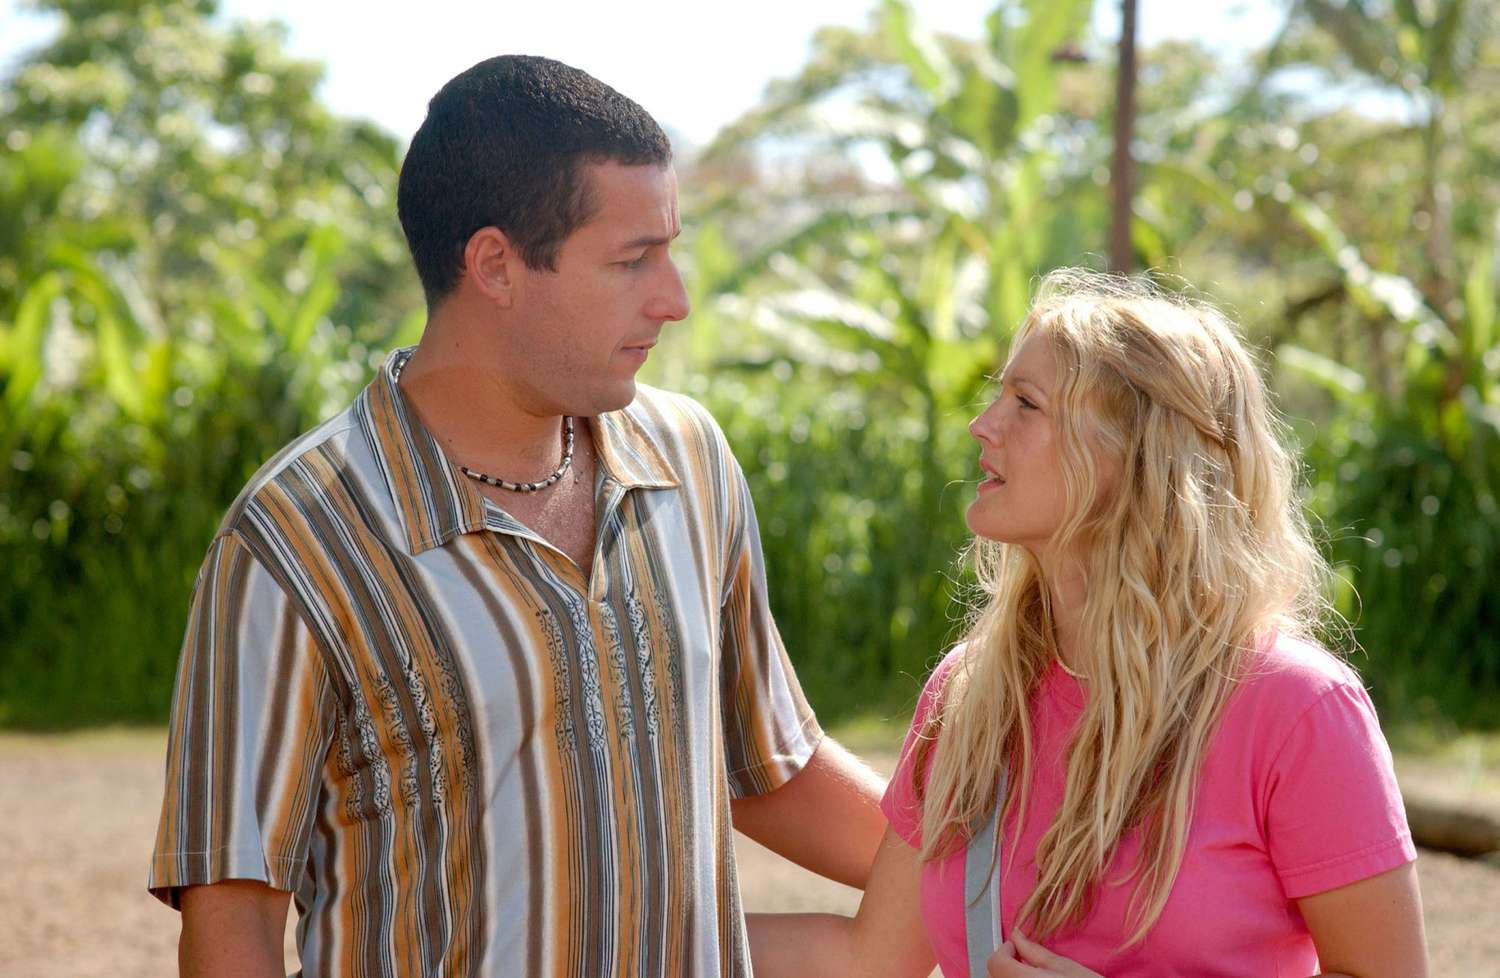 Adam Sandler and Drew Barrymore look at each other romantically 